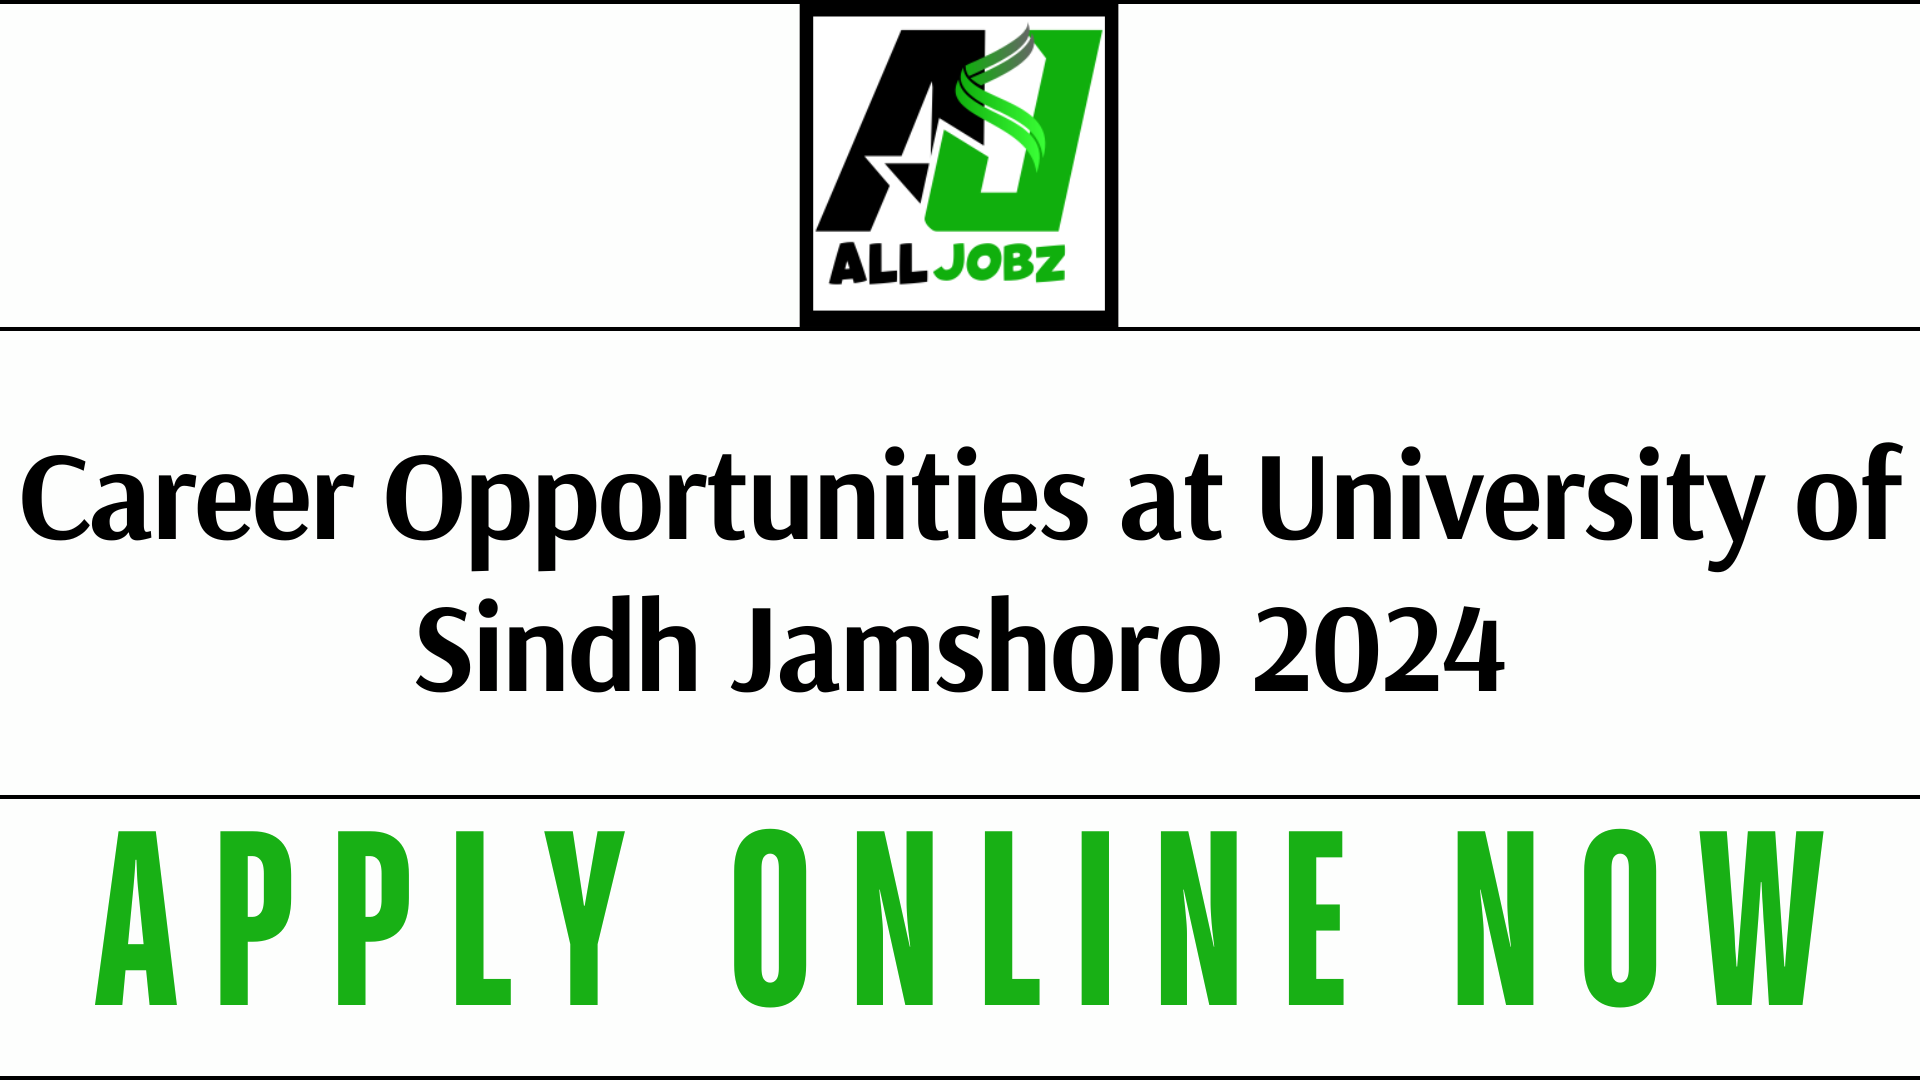 Career Opportunities At University Of Sindh Jamshoro 2024